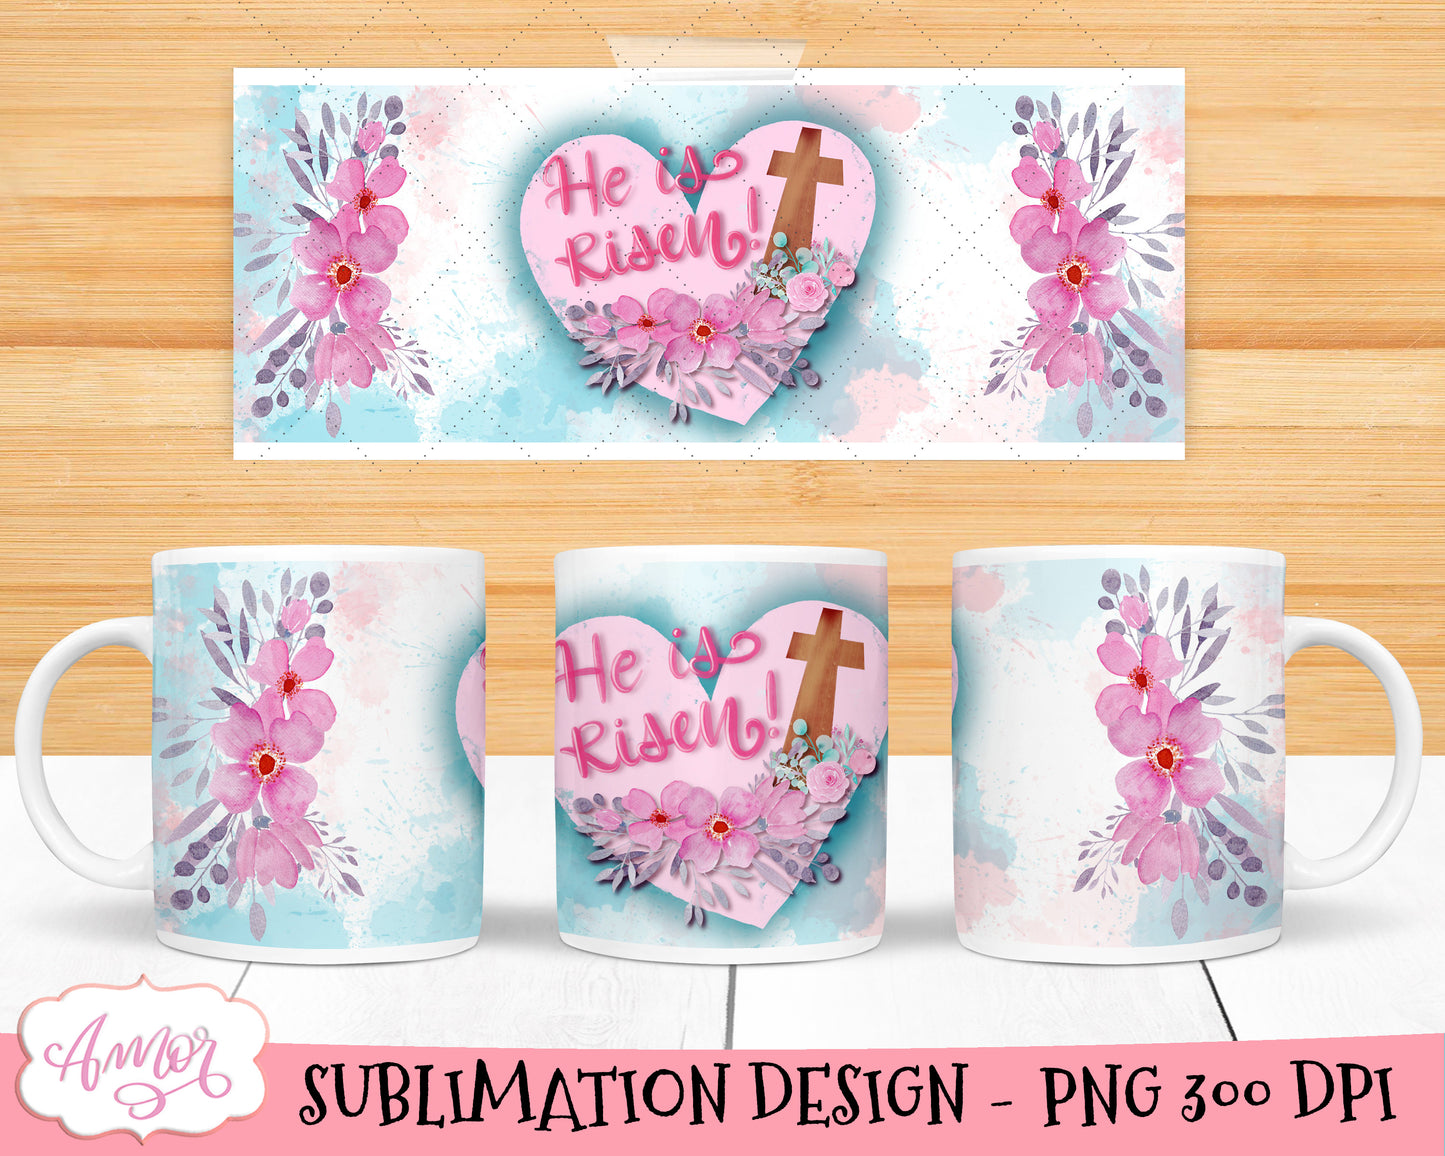 He is risen mug wrap for sublimation